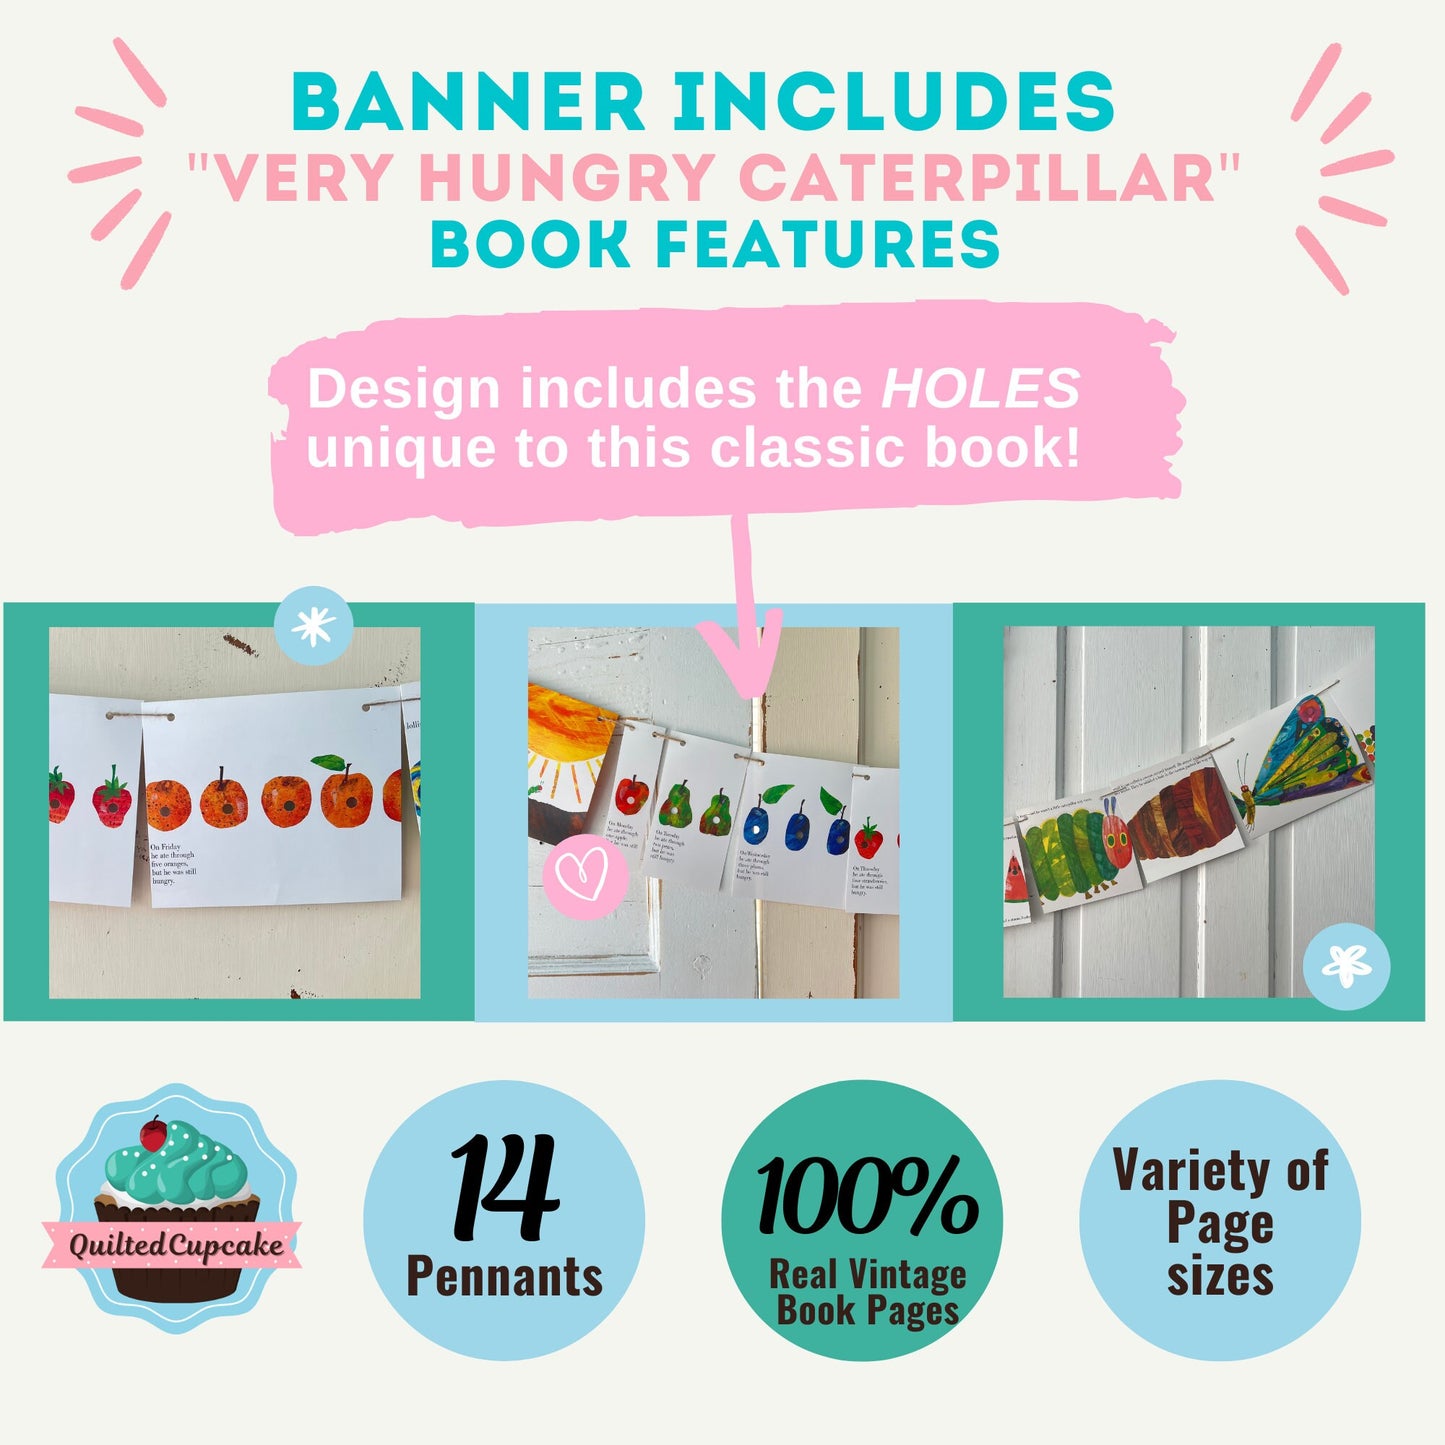 Very Hungry Caterpillar Banner/Story Book Page Garland /14 Pennants for Baby Shower, Birthday Party/READY to SHIP/Holes Included